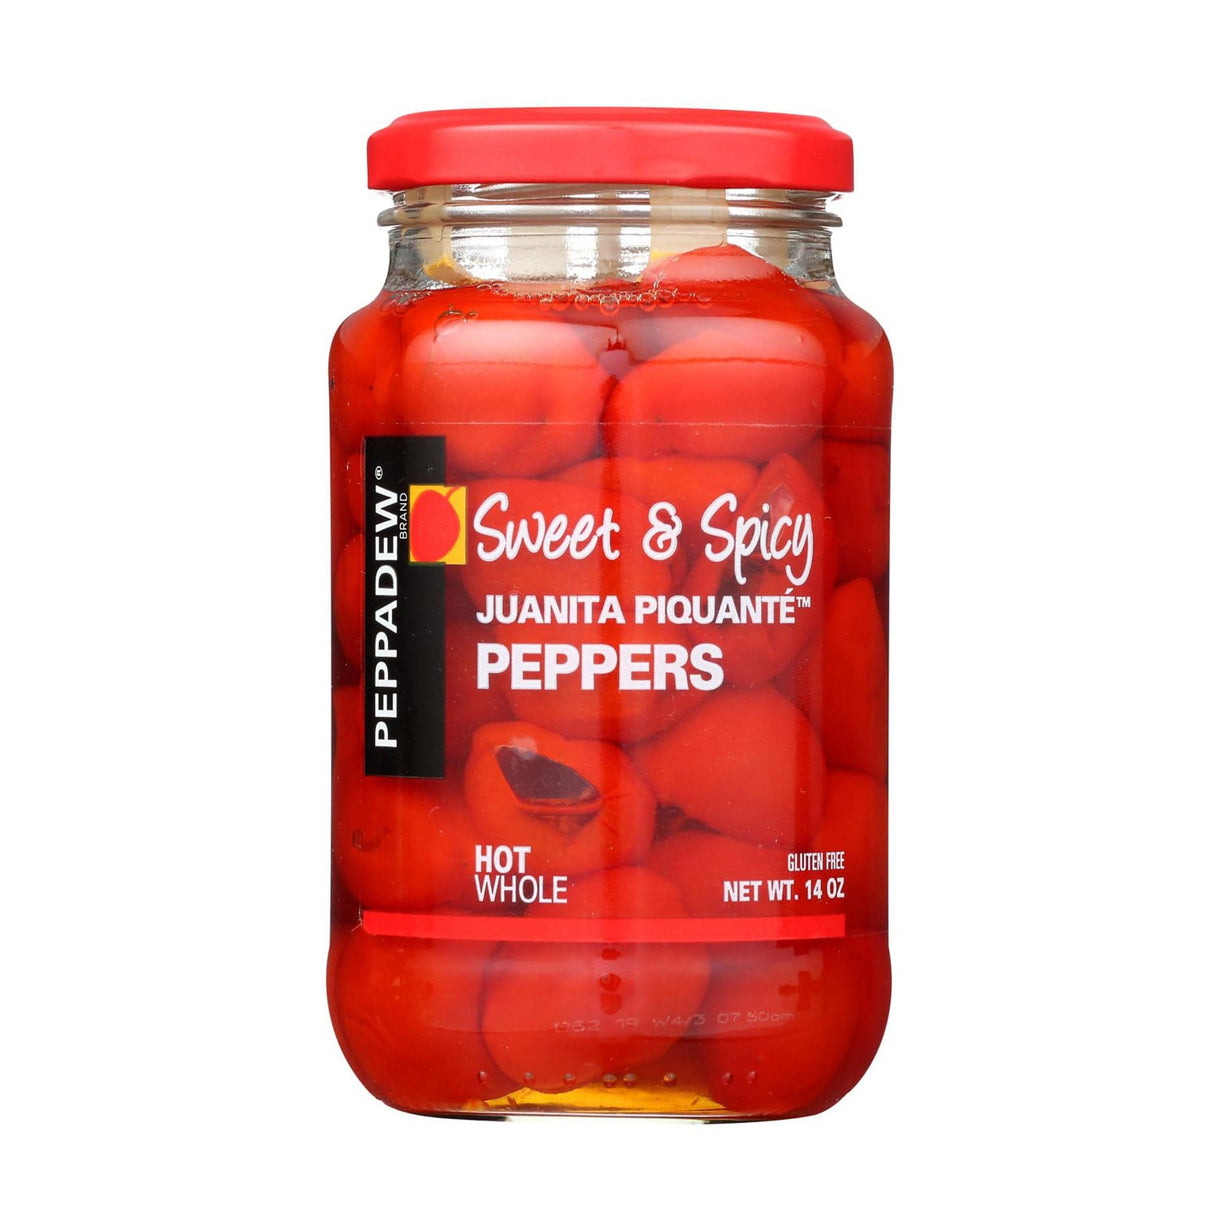 Peppadew Hot Whole Piquante Peppers (Sweet & Spicy)